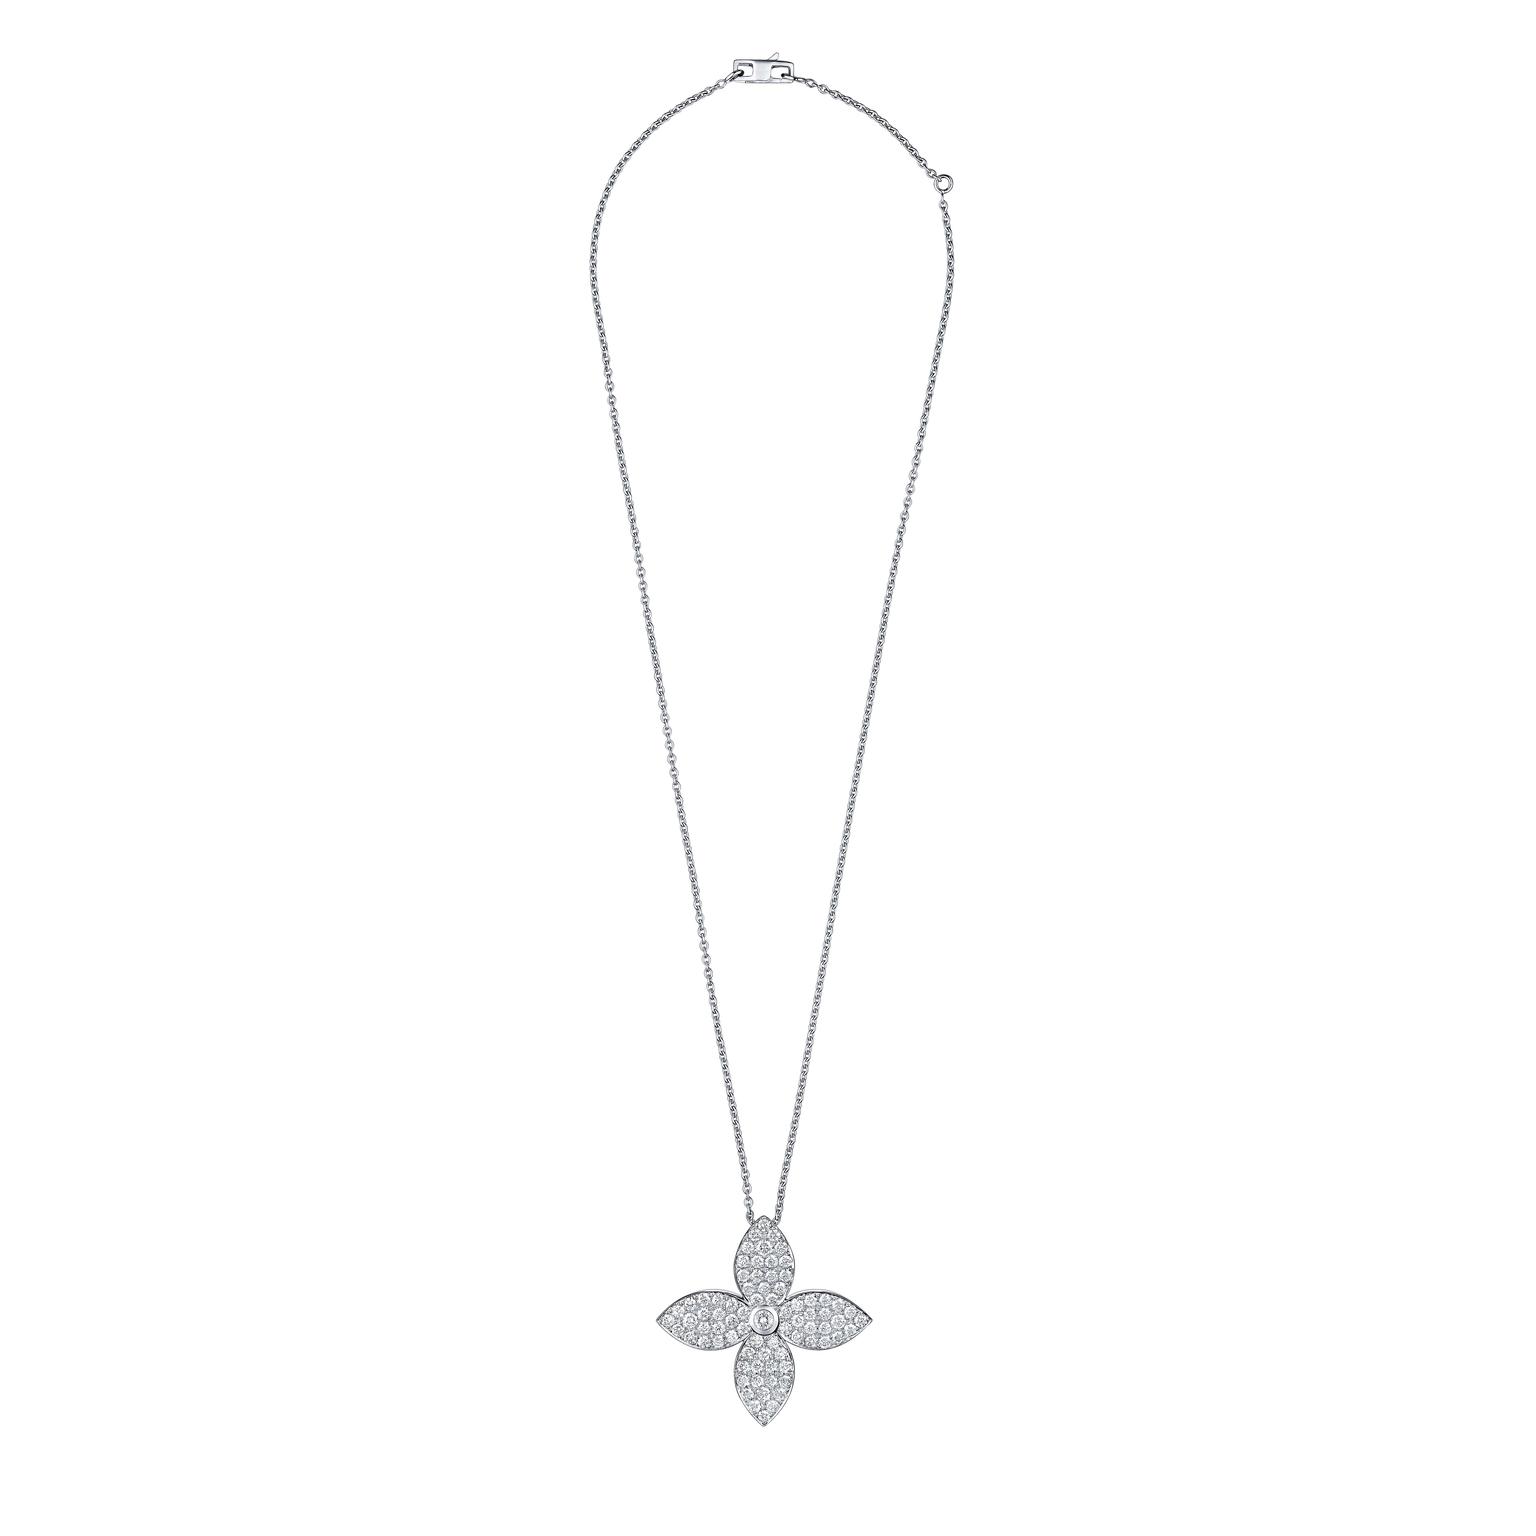 This Monogram Star pendant necklace recreates the iconic Louis Vuitton star-shaped flower in white gold and diamonds.